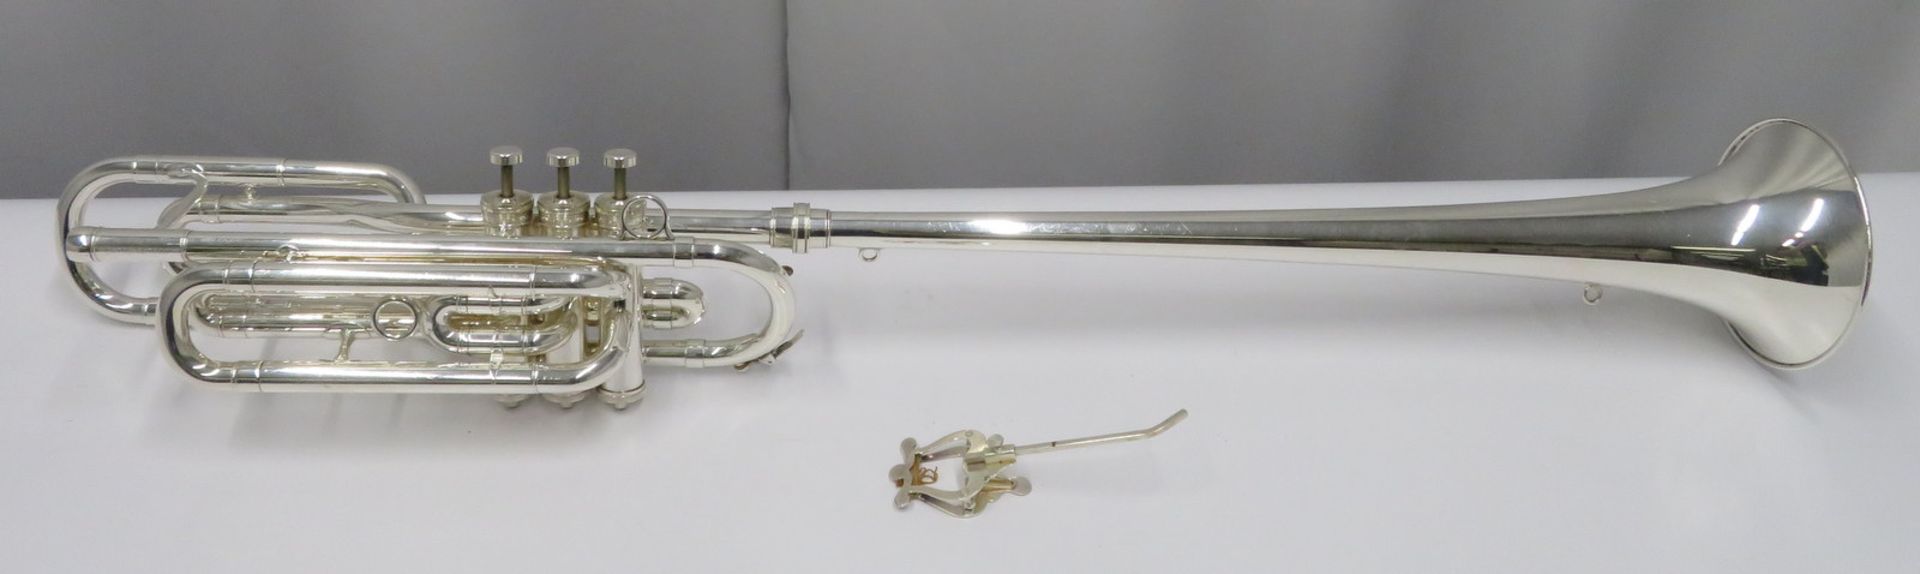 Besson International BE708 fanfare trumpet with case. Serial number: 887800. - Image 3 of 14